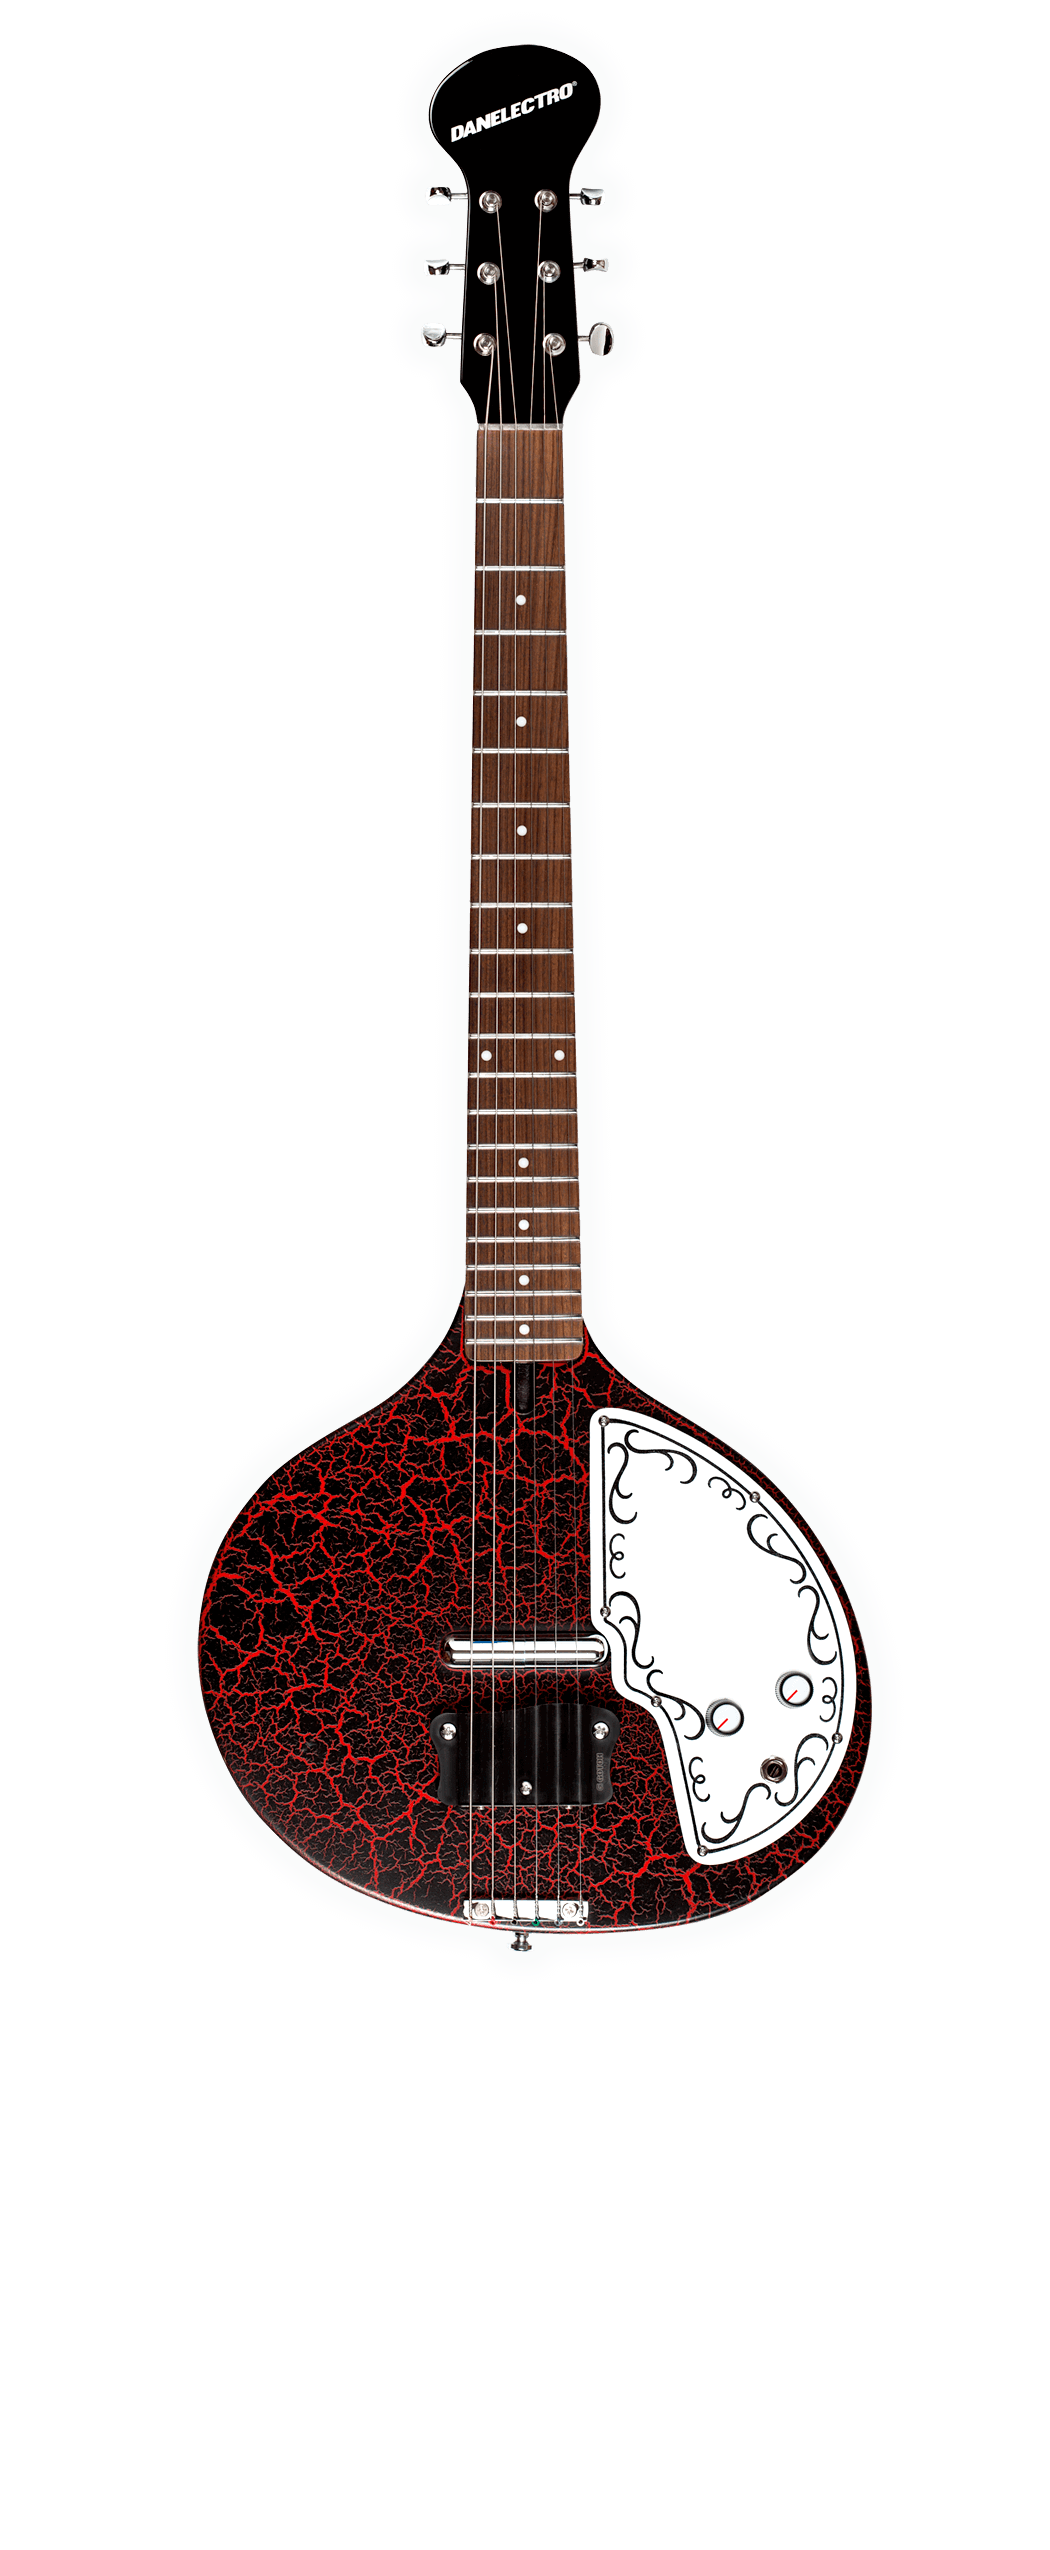 Danelectro Baby Sitar - Red Crackle Guitars on Main